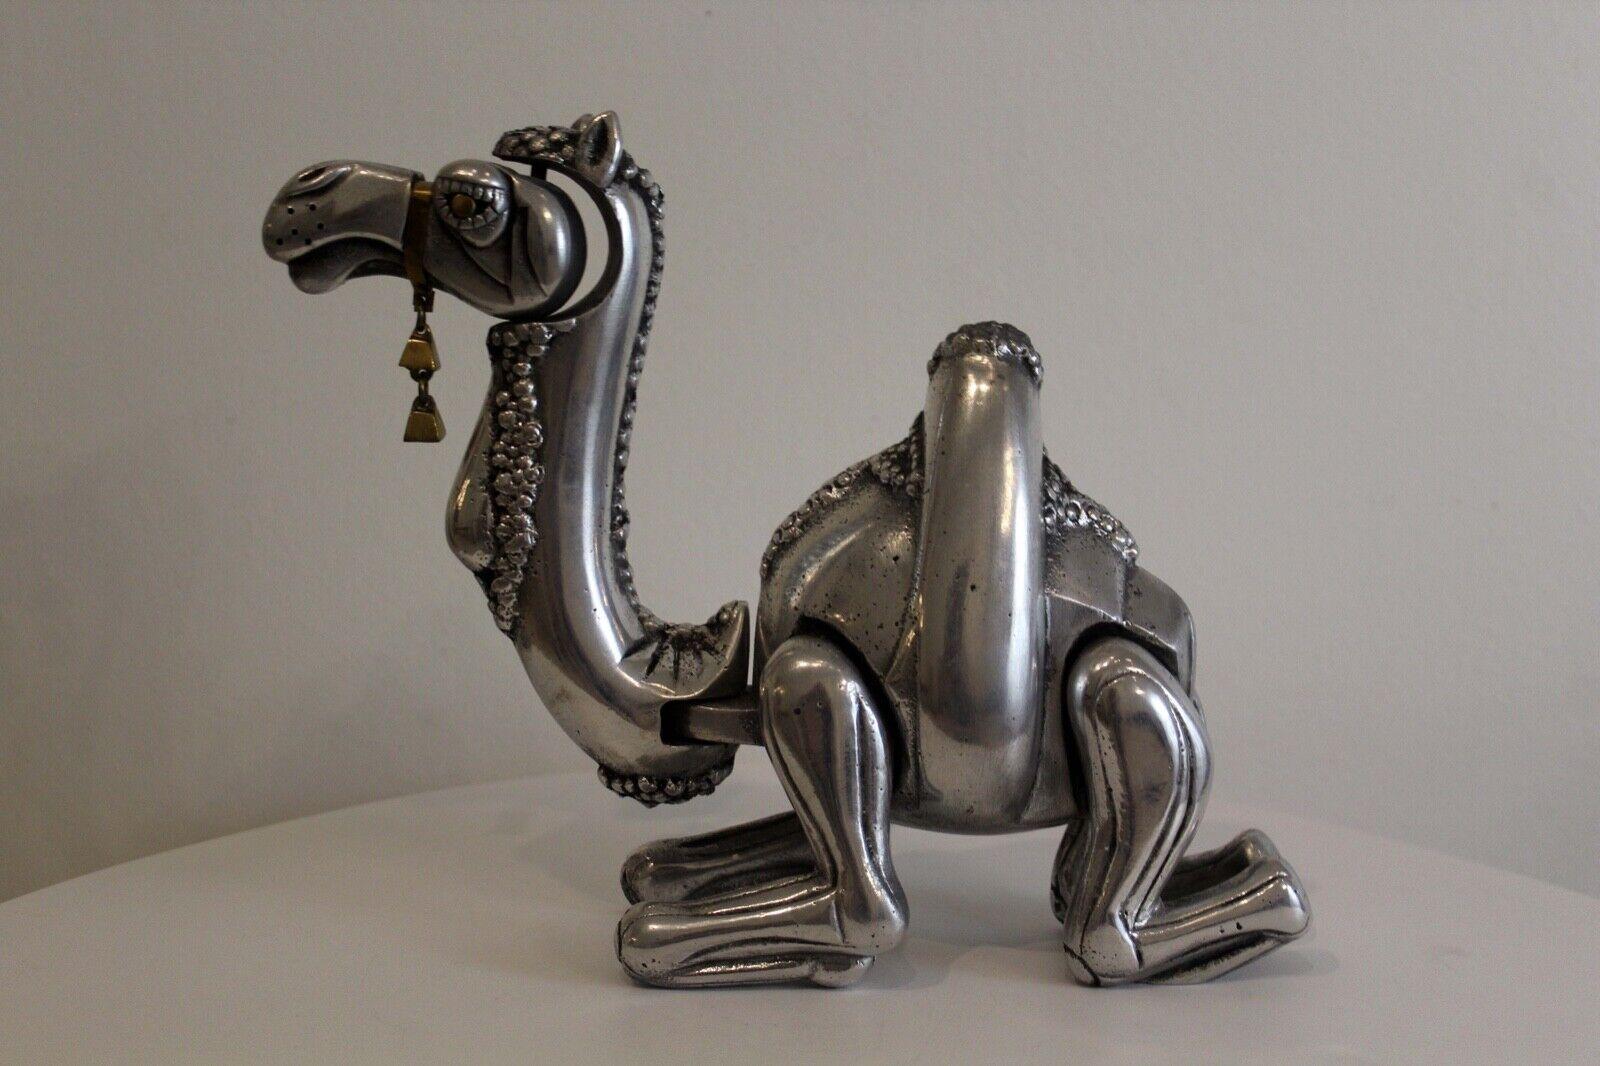 For your consideration is this cool chrome Frank Meisler adjustable camel sculpture, made in Israel, hand signed, number 72/280. Dimensions: 11W x 3D x 8H.
 